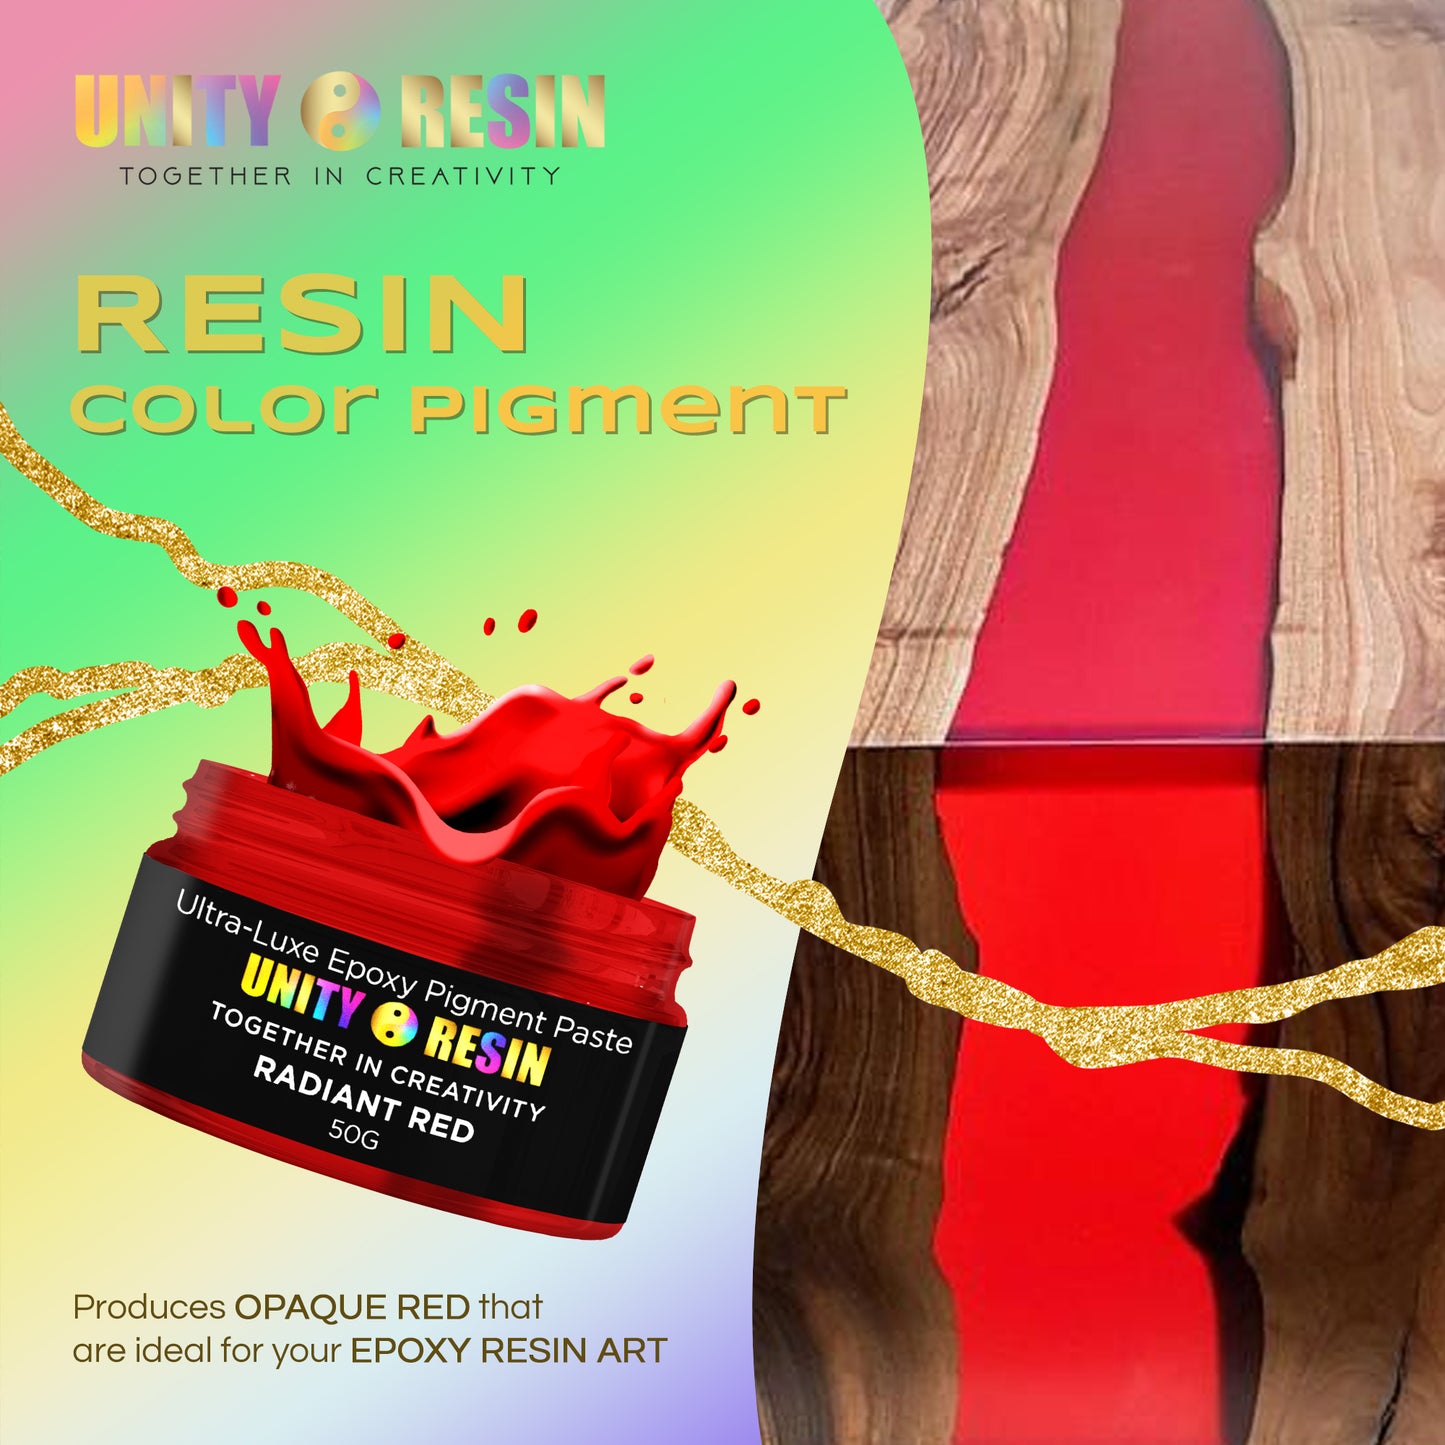 red resin color, red epoxy dye, resin color, resin pigment, resin pigment pastes, red resin paint, red epoxy color, epoxy resin, resin supplies, resin art, red mica for resin, red mica powder, red resin, red epoxy resin, dark red paint for resin